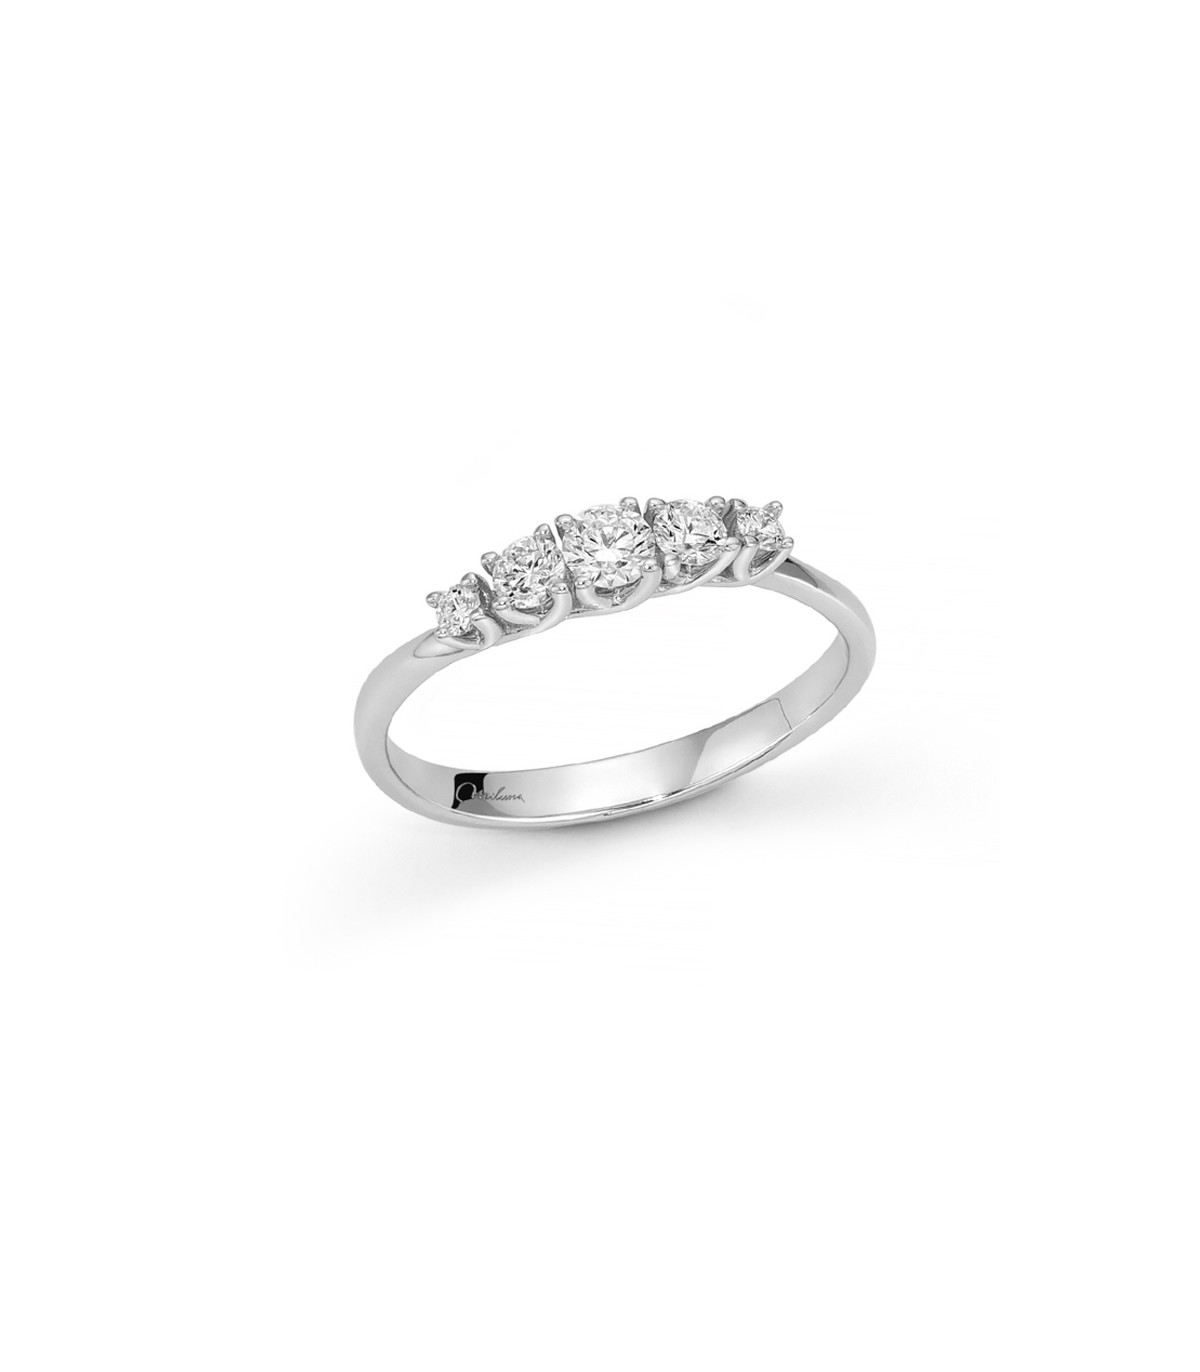 Miluna - Riviere Ring in 18k White Gold with Natural Diamonds - 0